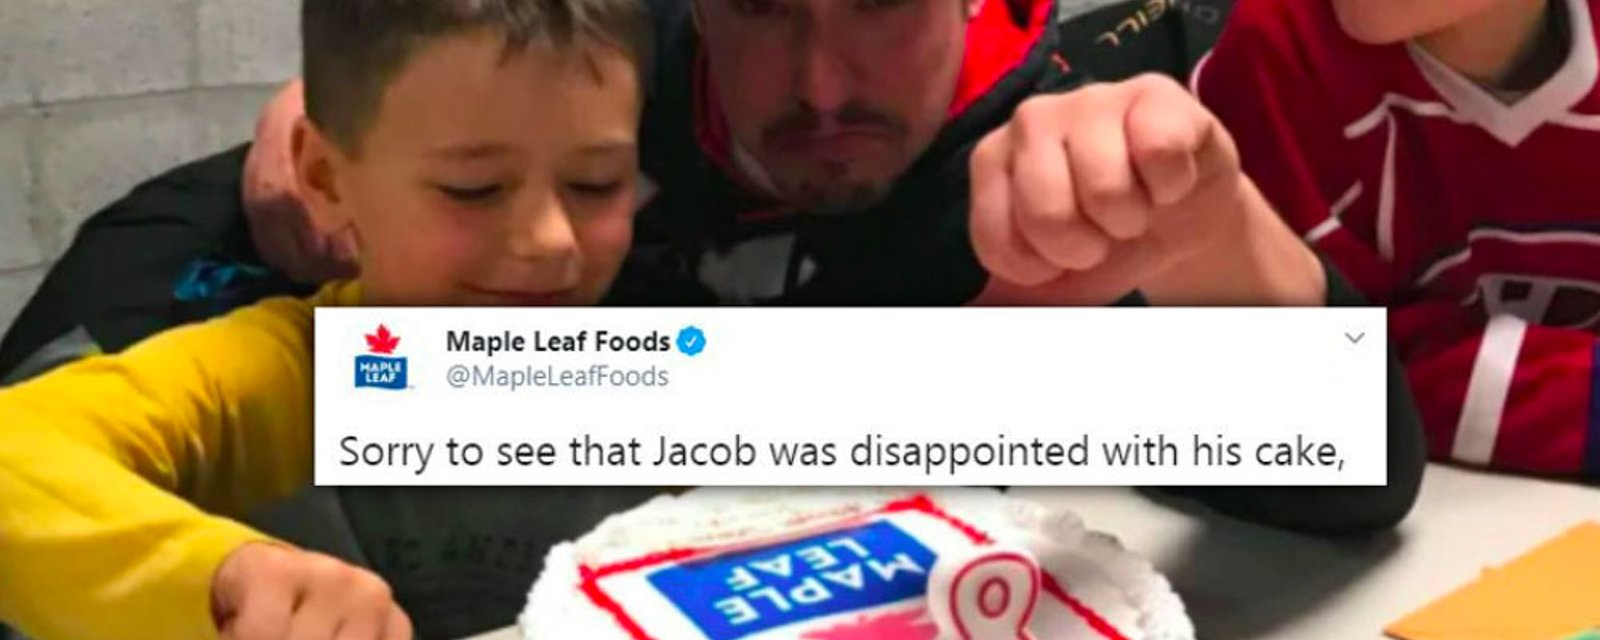 Maple Leaf Foods steps up for 8 year old boy who had his birthday cake ruined